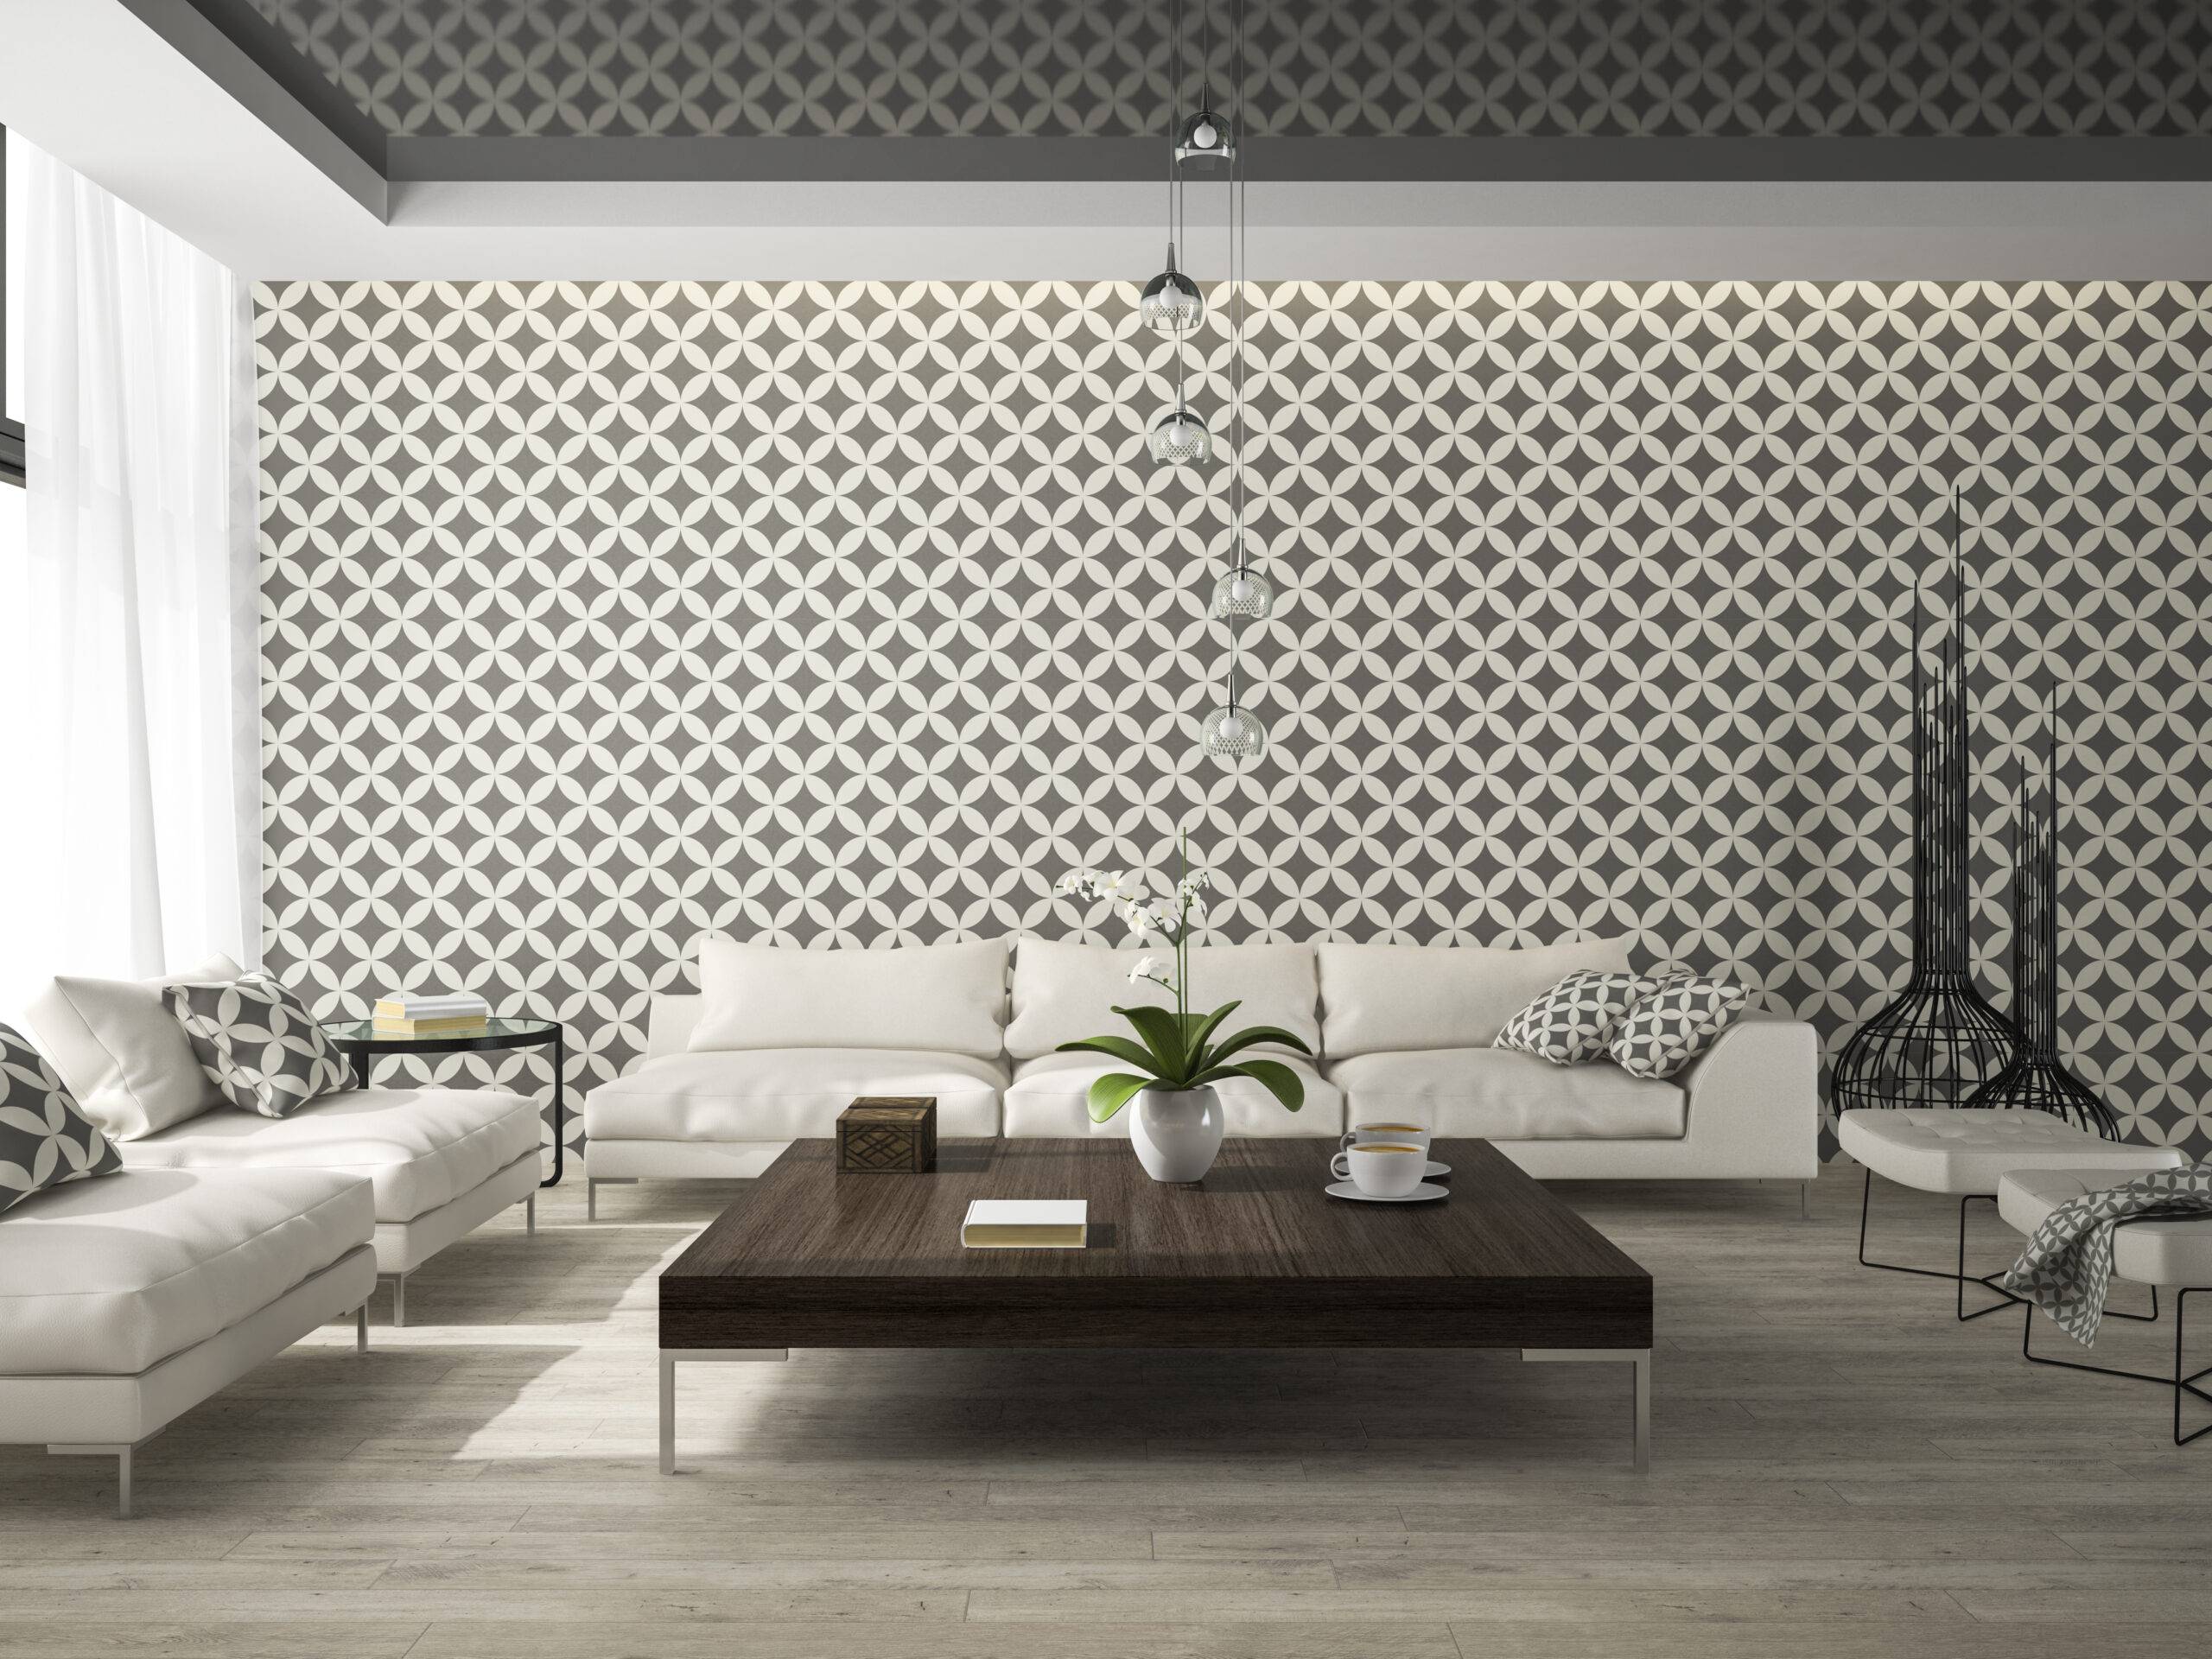 interior-of-living-room-with-stylish-wallpaper-3d-2021-08-26-18-15-27-utc-92671-scaled